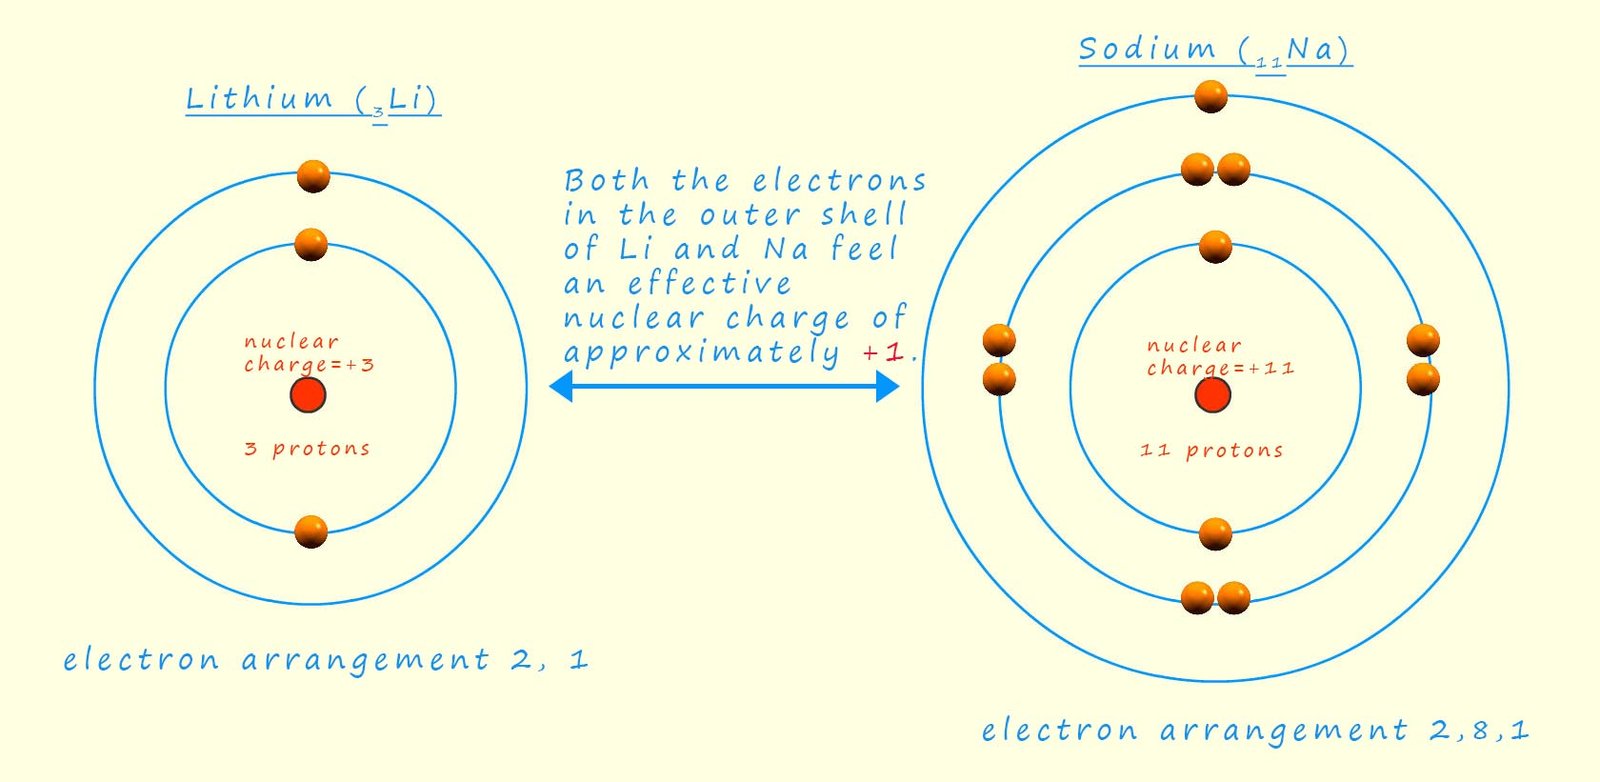 Image to show how the inner electrons effectively shield the outer valence electron in lithium and sodium atoms from the full nulear charge